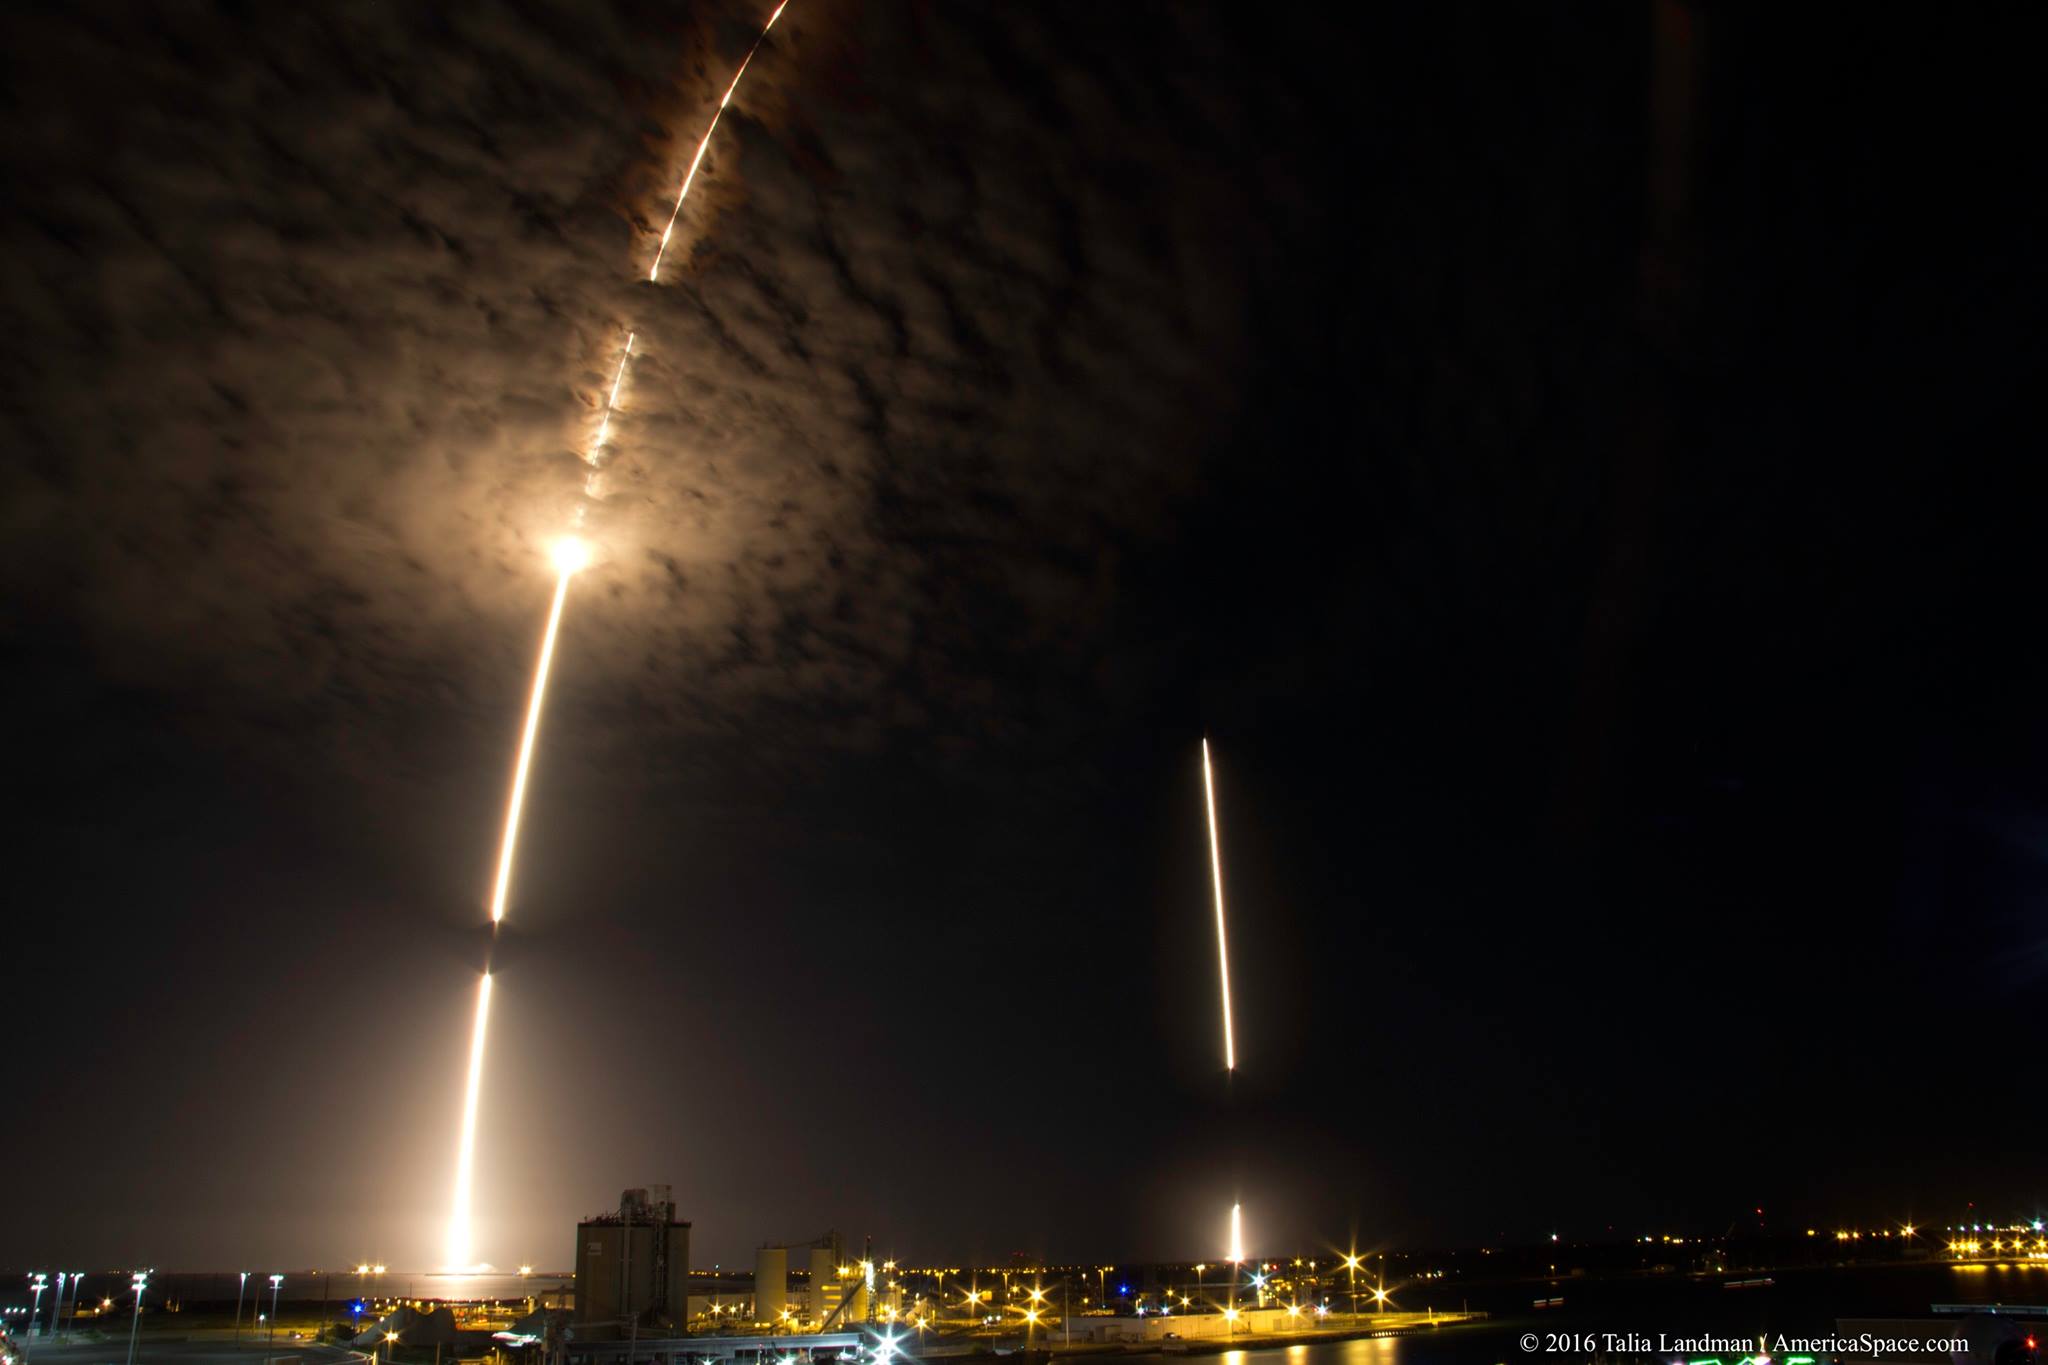 The Upgraded Falcon 9 launches into the night, and returns from the night, with its first-stage hardware alighting perfectly onto Landing Zone (LZ)-1 at the Cape. Photo Credit: Talia Landman / AmericaSpace